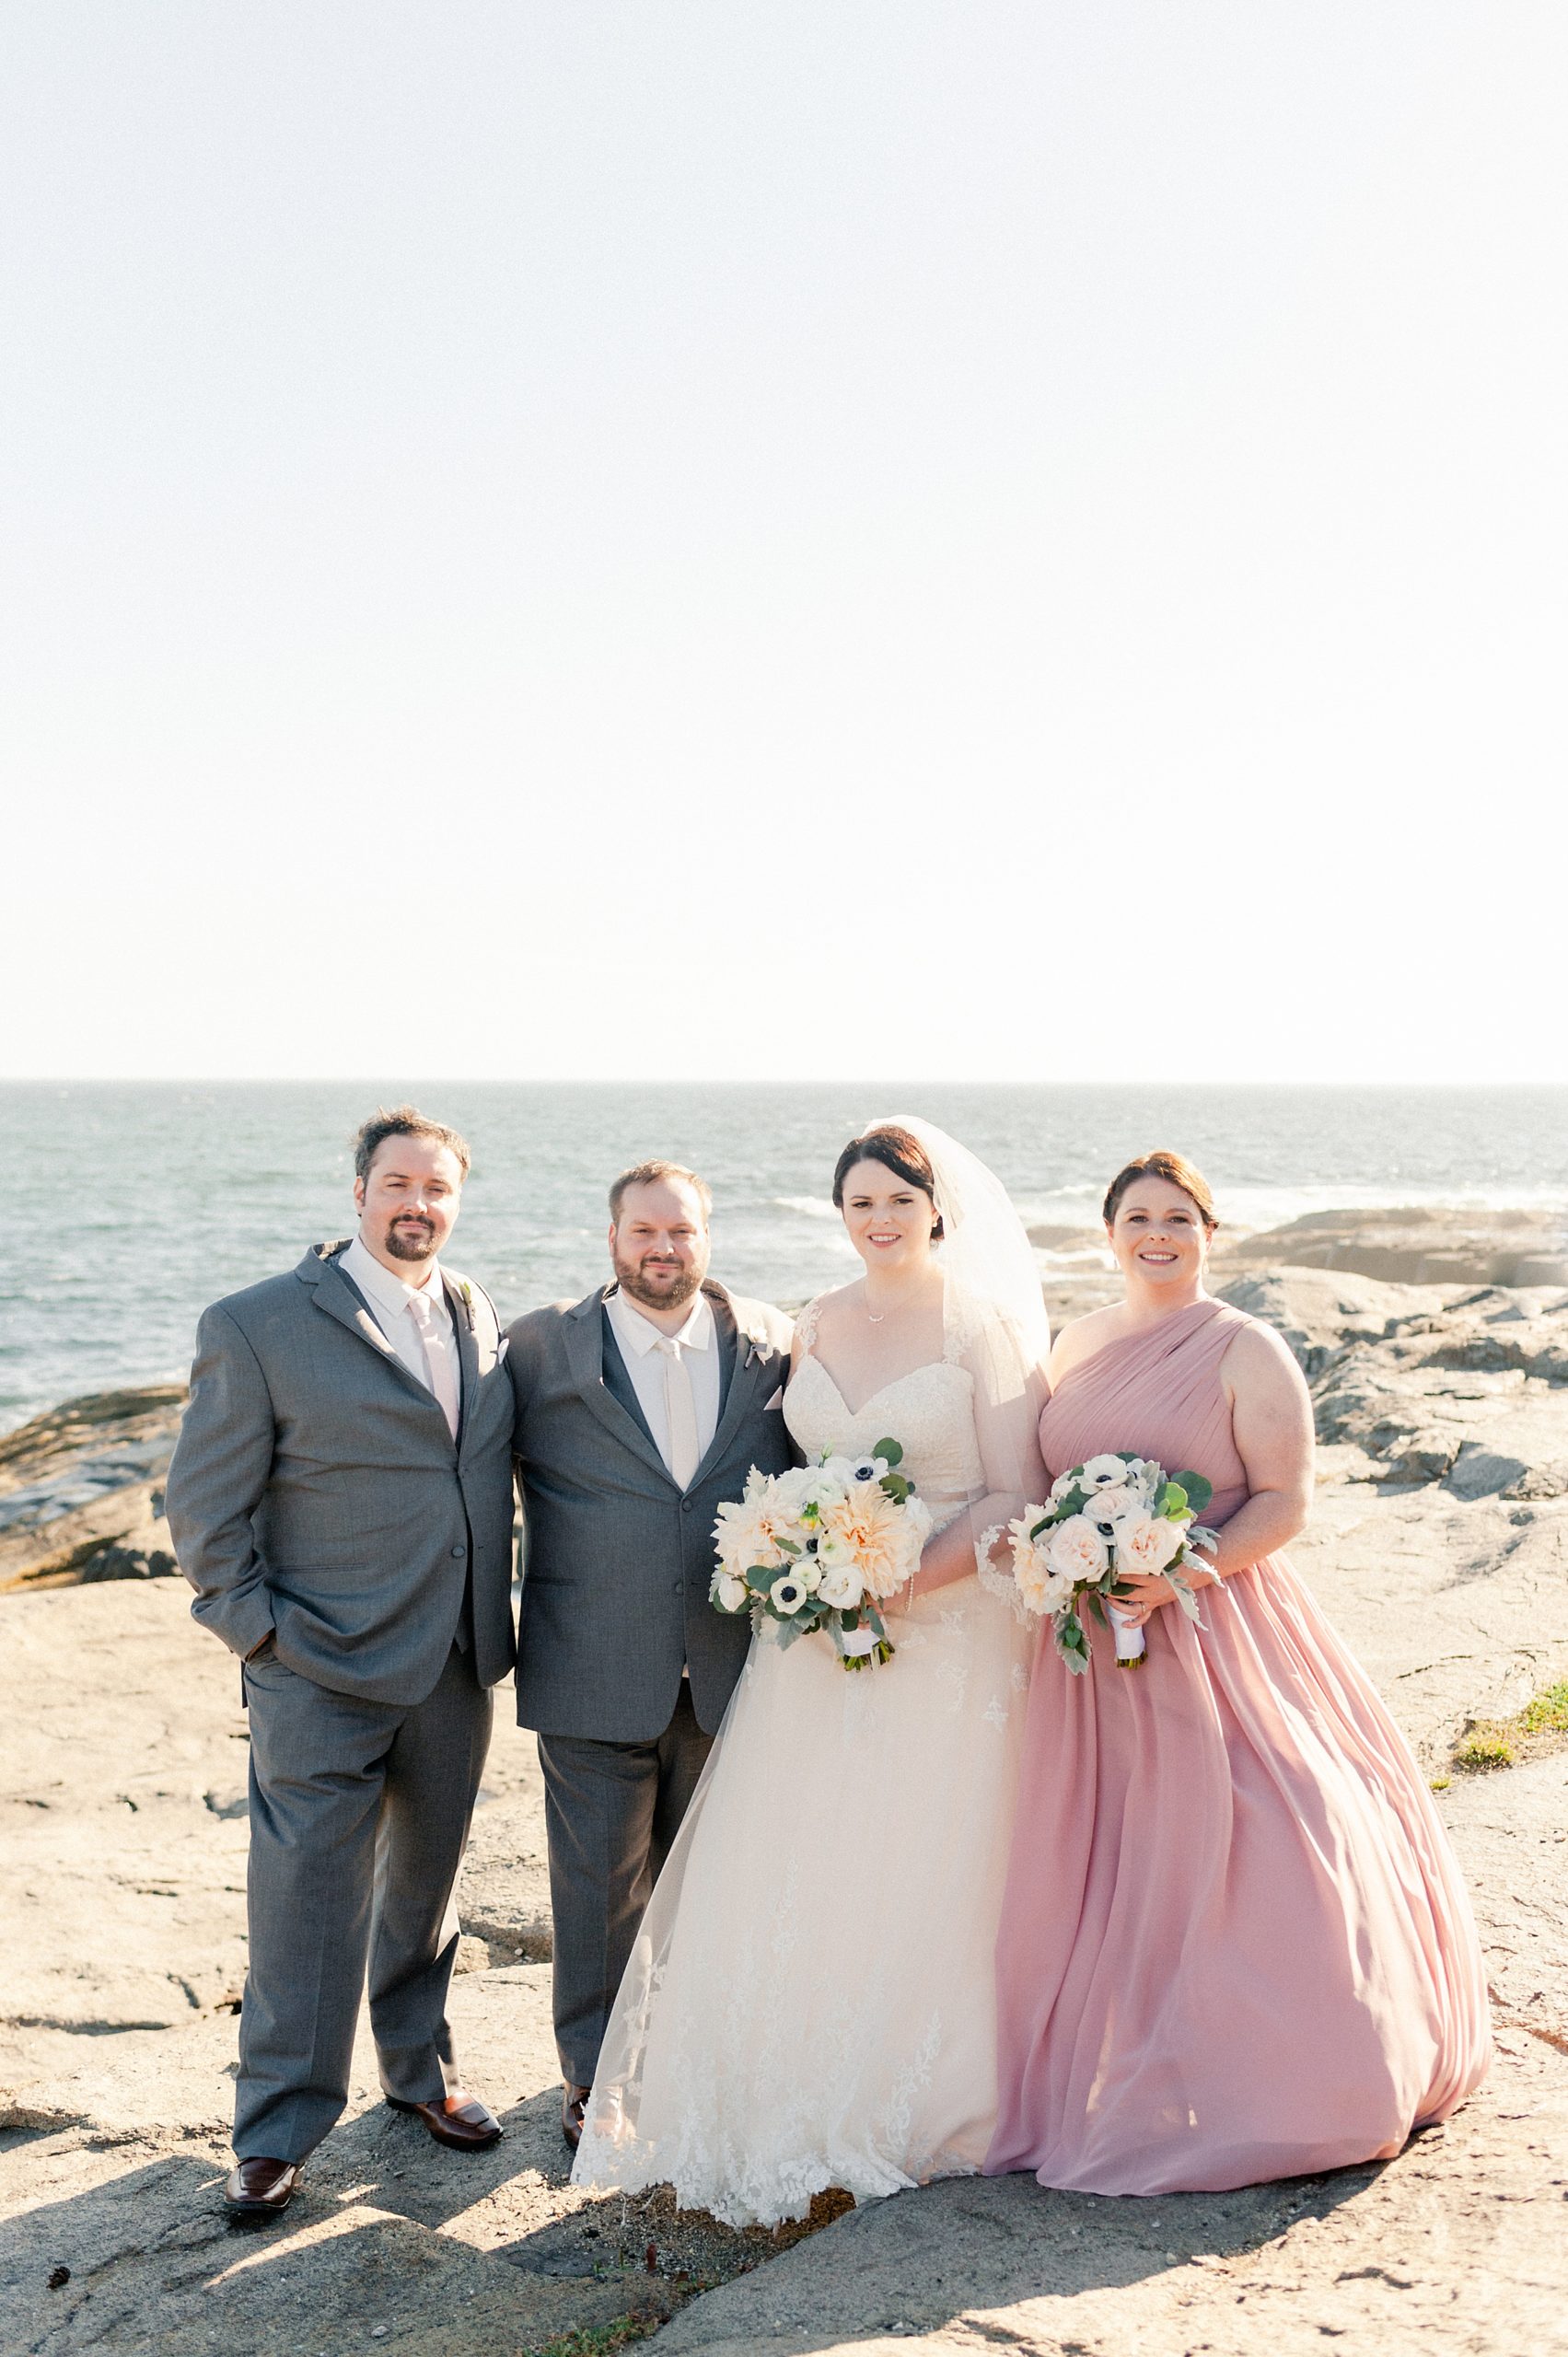 wedding party portraits at nubble lighthouse in york harbor maine